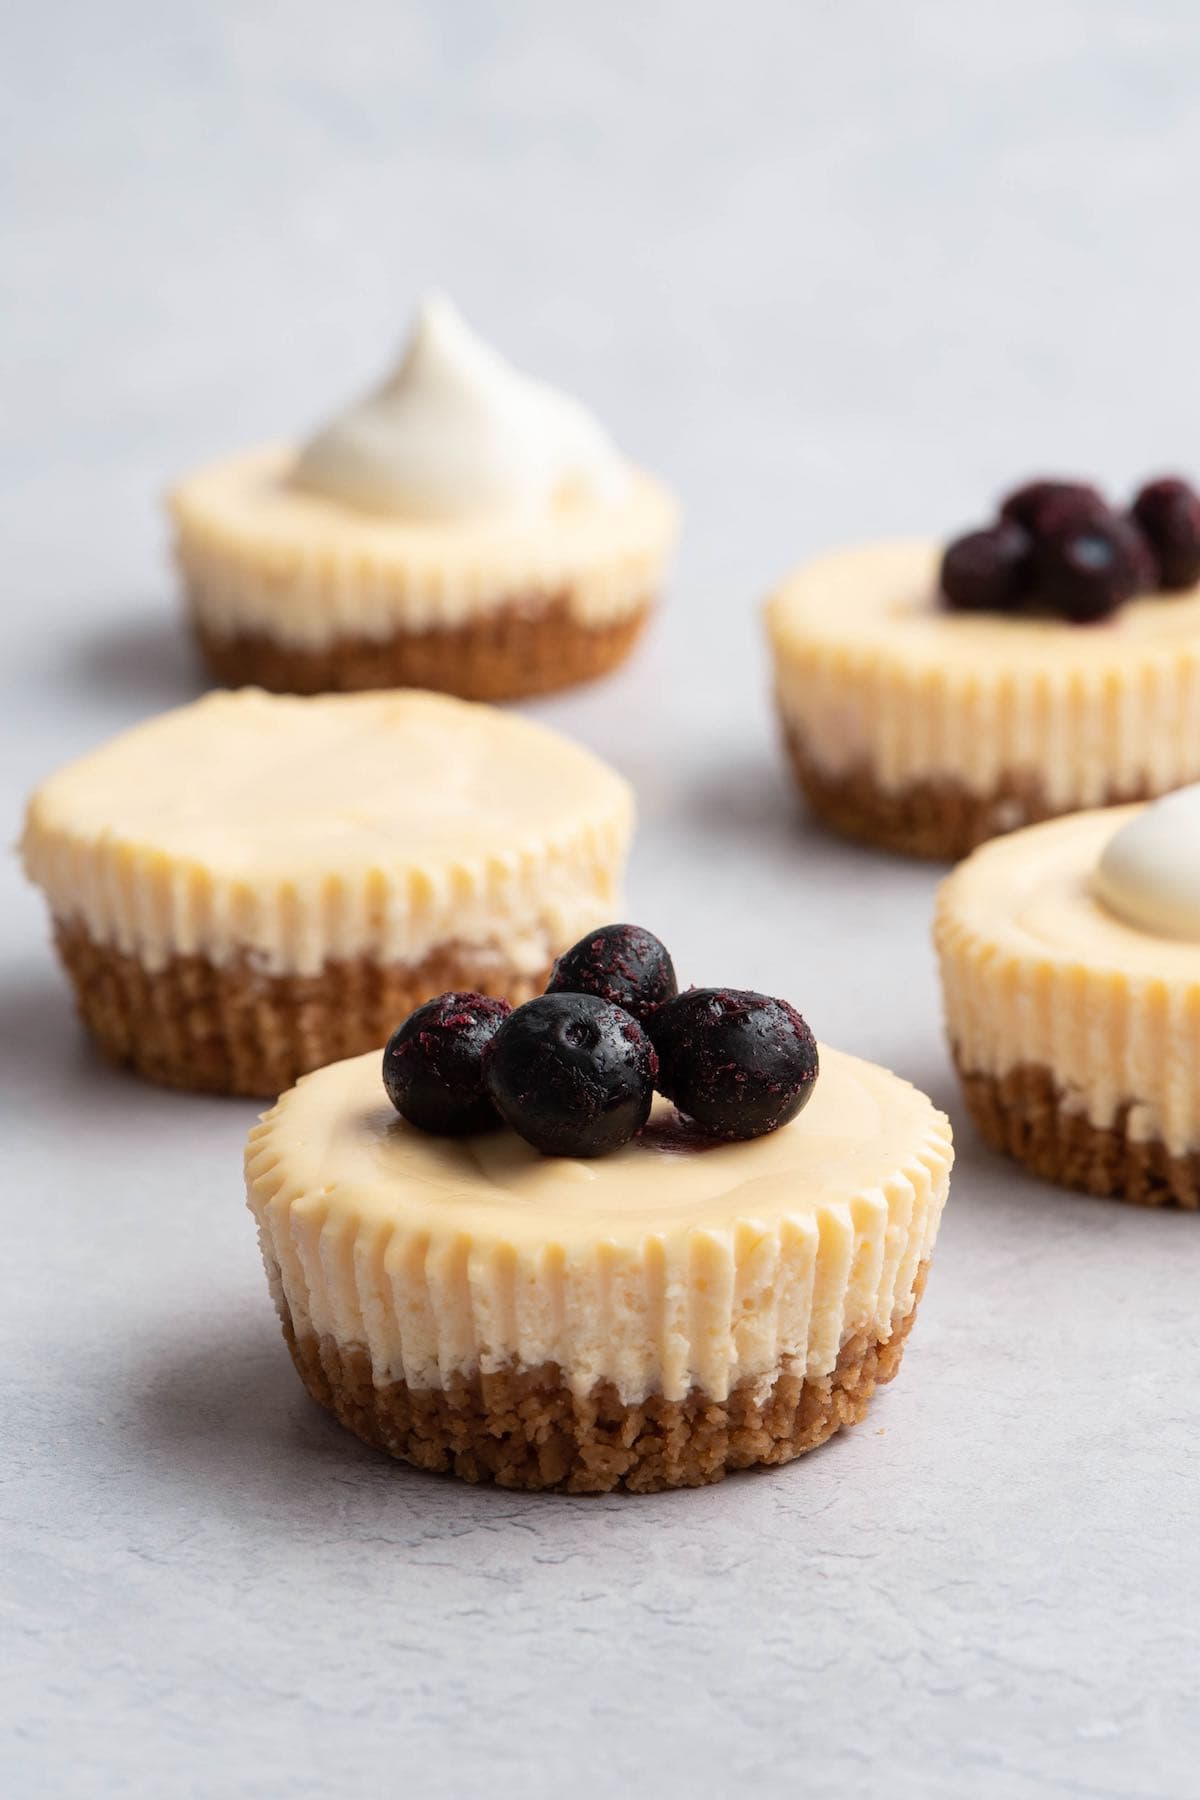 set and chilled cheesecake cupcakes with blueberries on top.